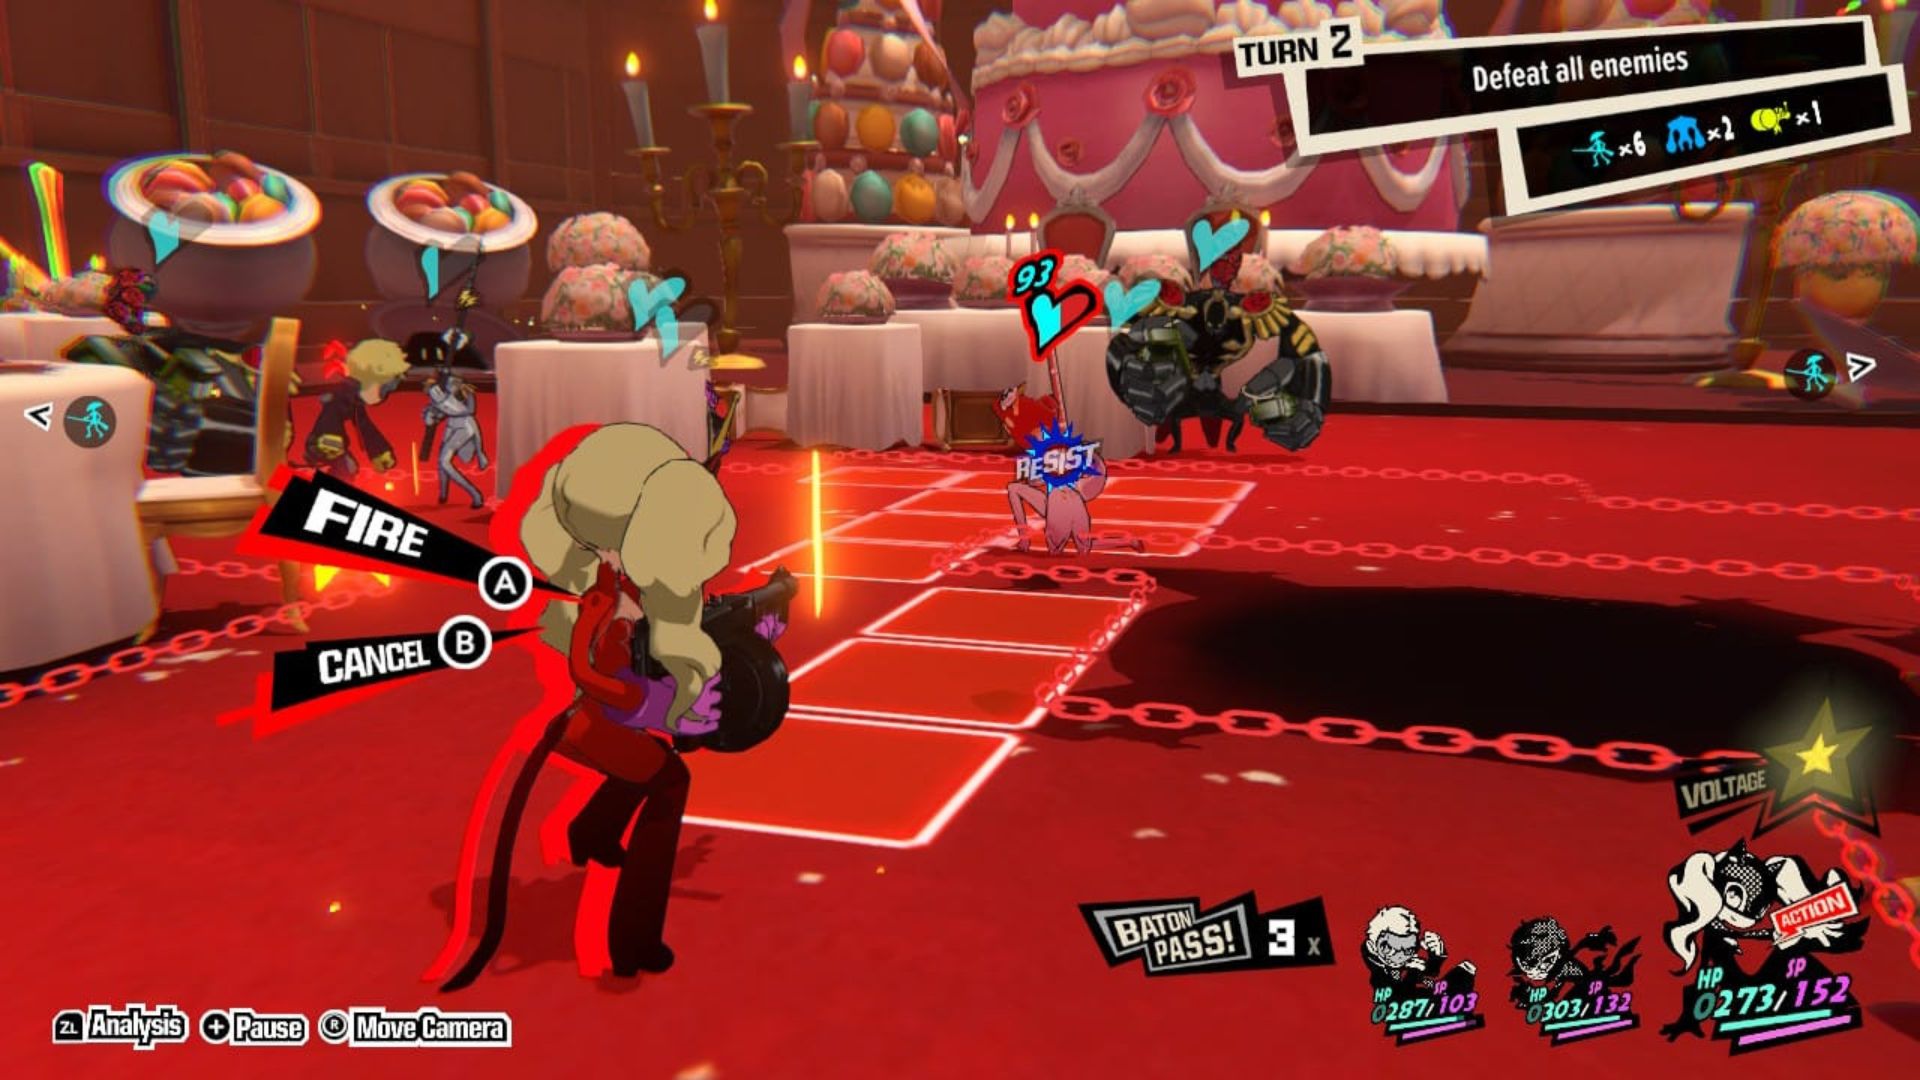 Persona 5 Tactica review – a decent swansong